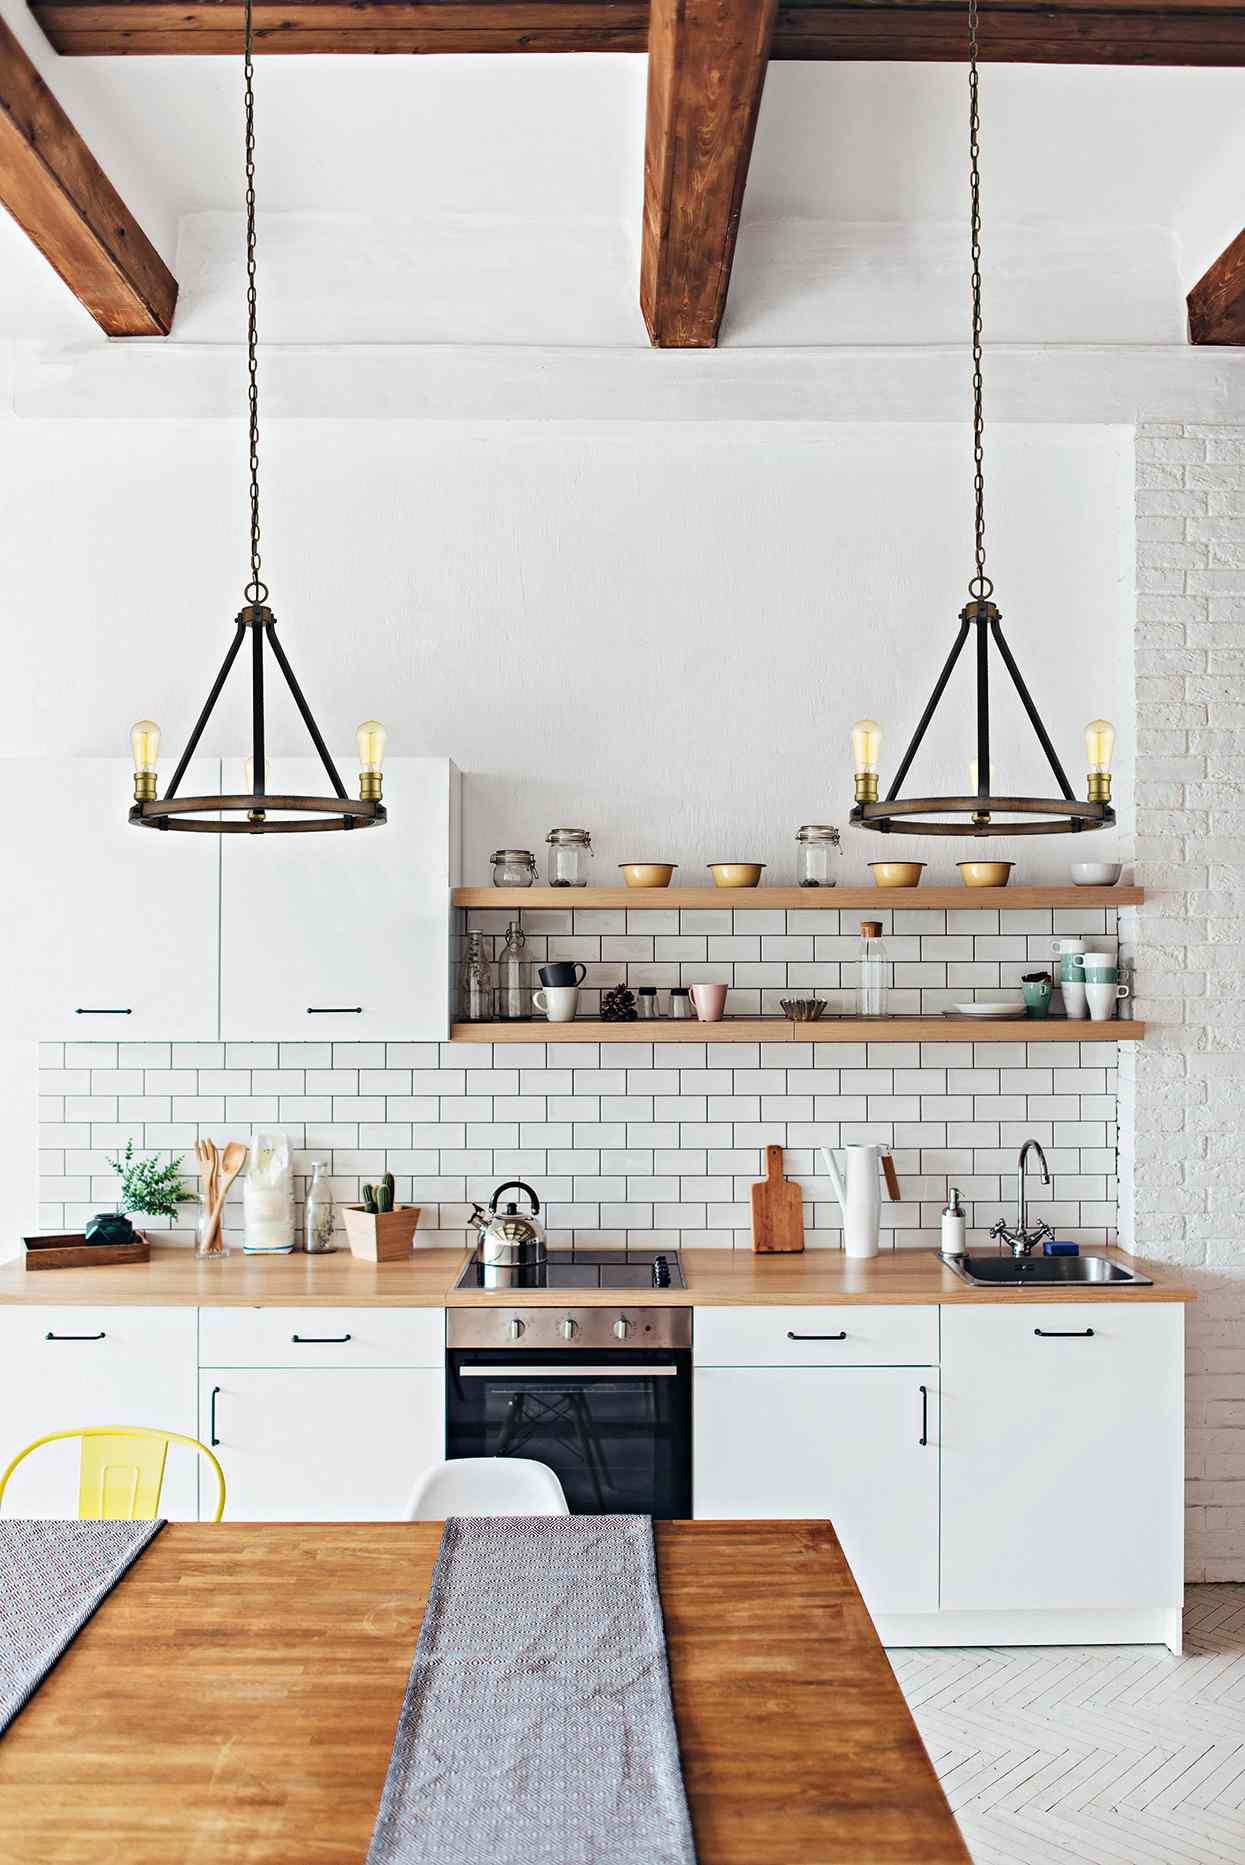 2. Consider Scale When Selecting Light Fixtures